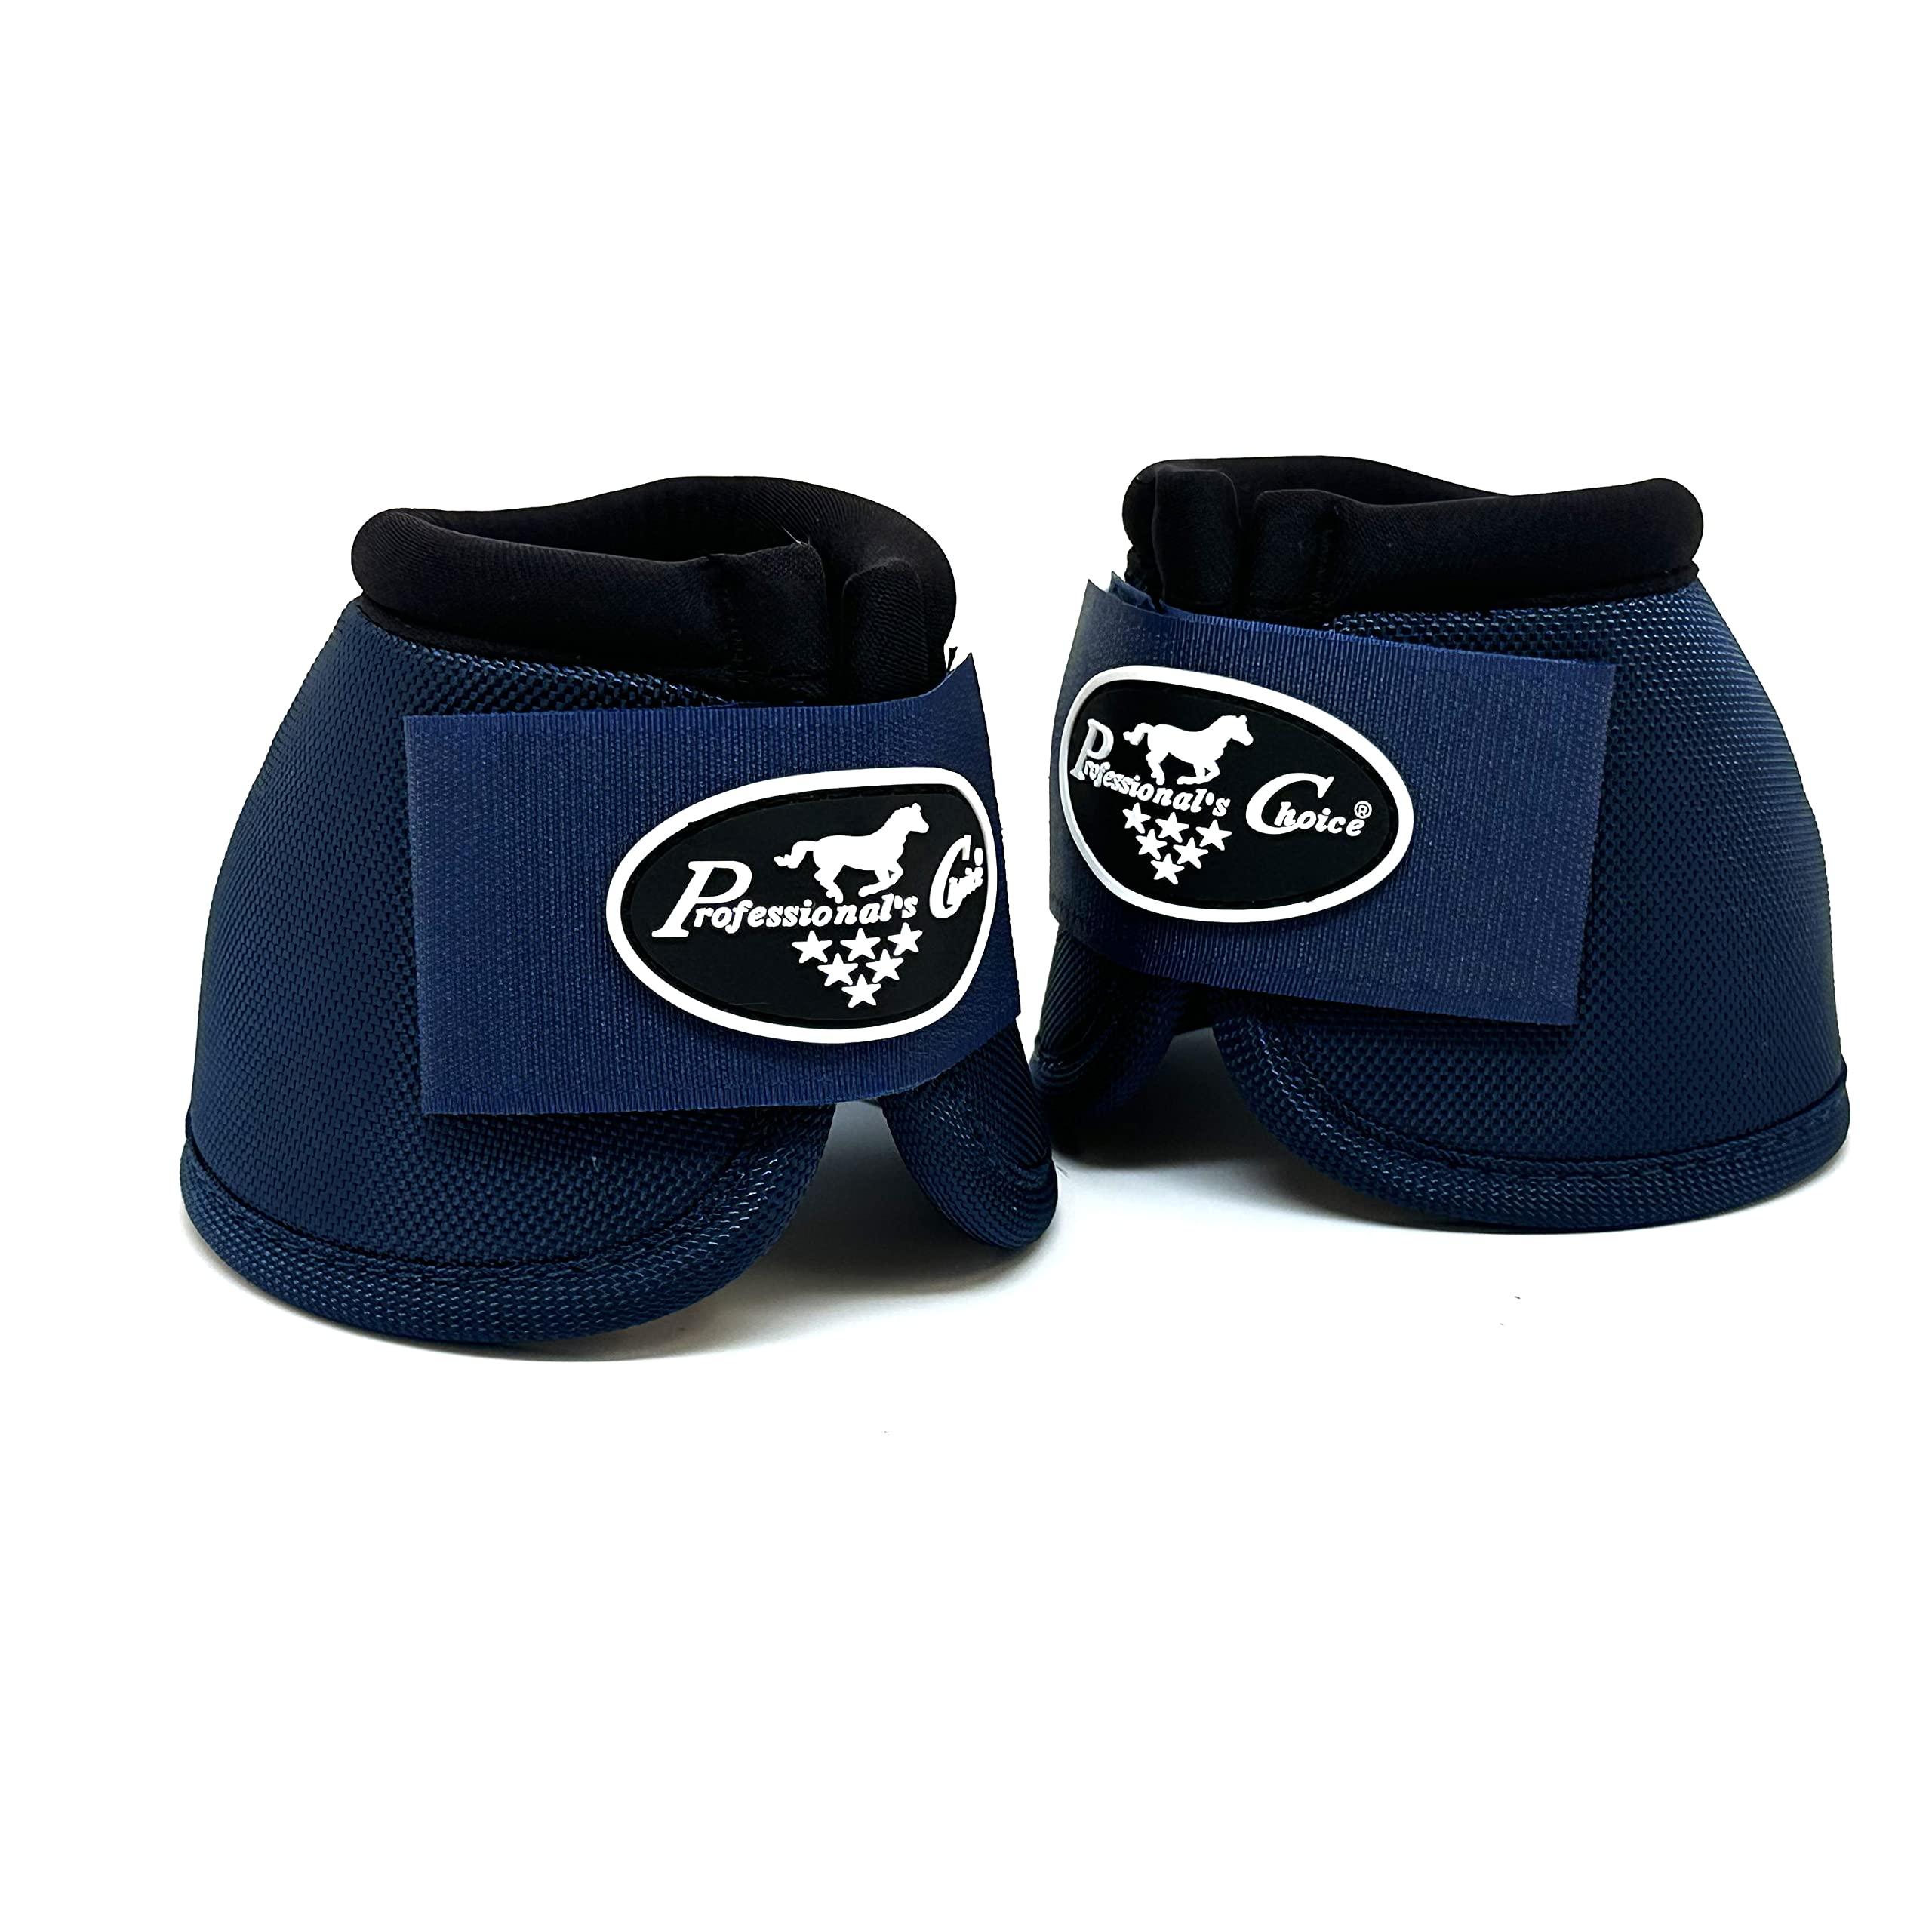 Professional's Choice Ballistic Overreach Bell Boots for Horses | Superb Protection, Durability & Comfort | Quick Wrap Hook & Loop | Sold in Pairs | Large Navy Blue